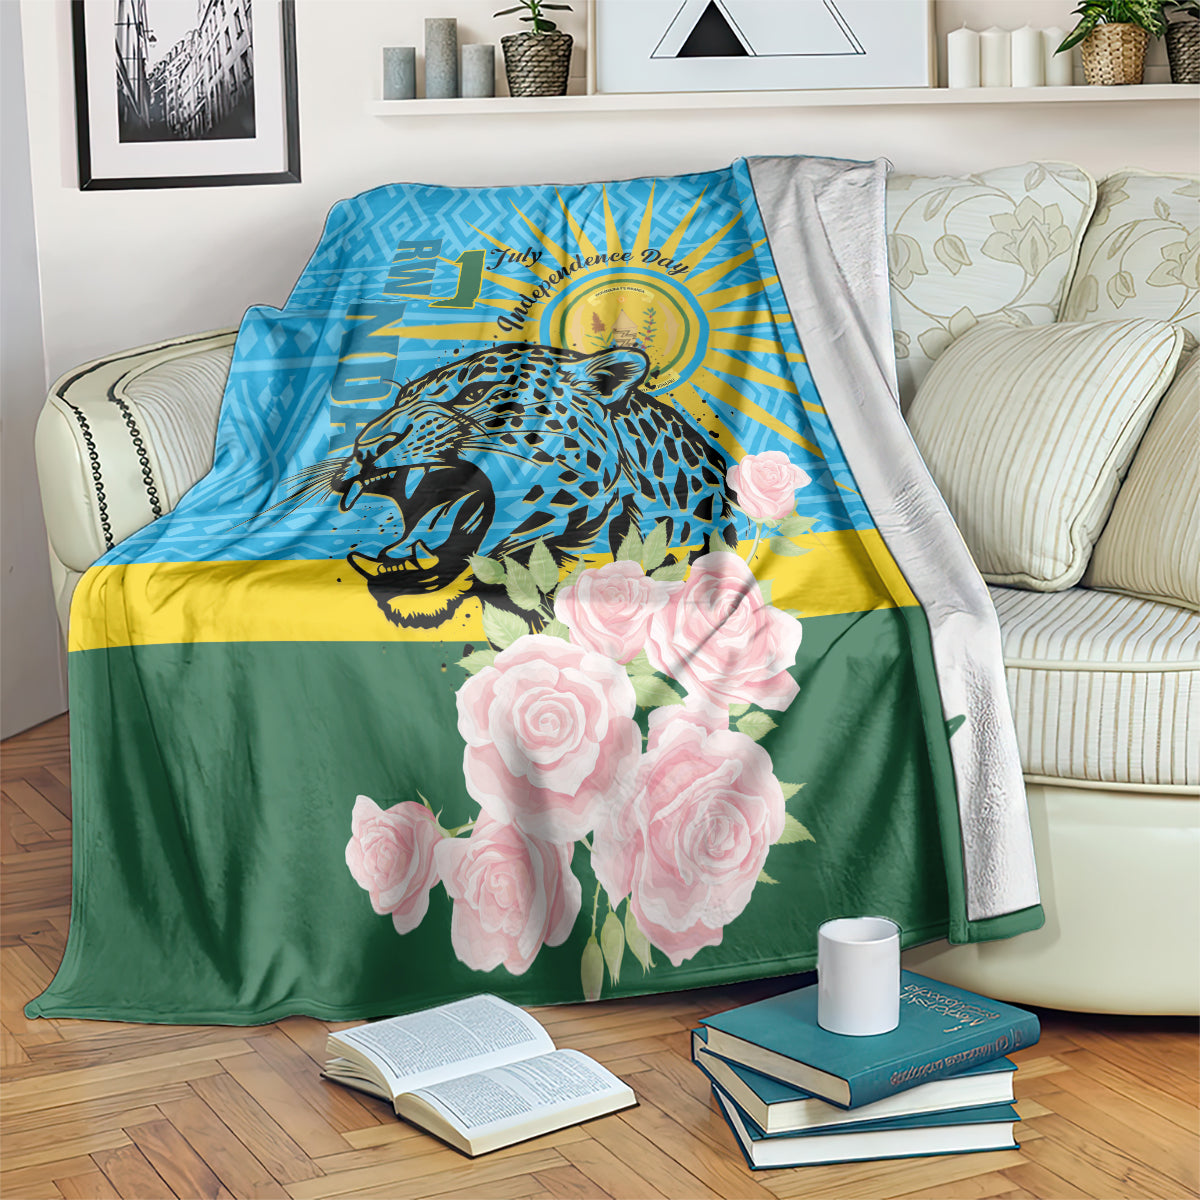 Rwanda Independence Day Blanket Leopard With Roses